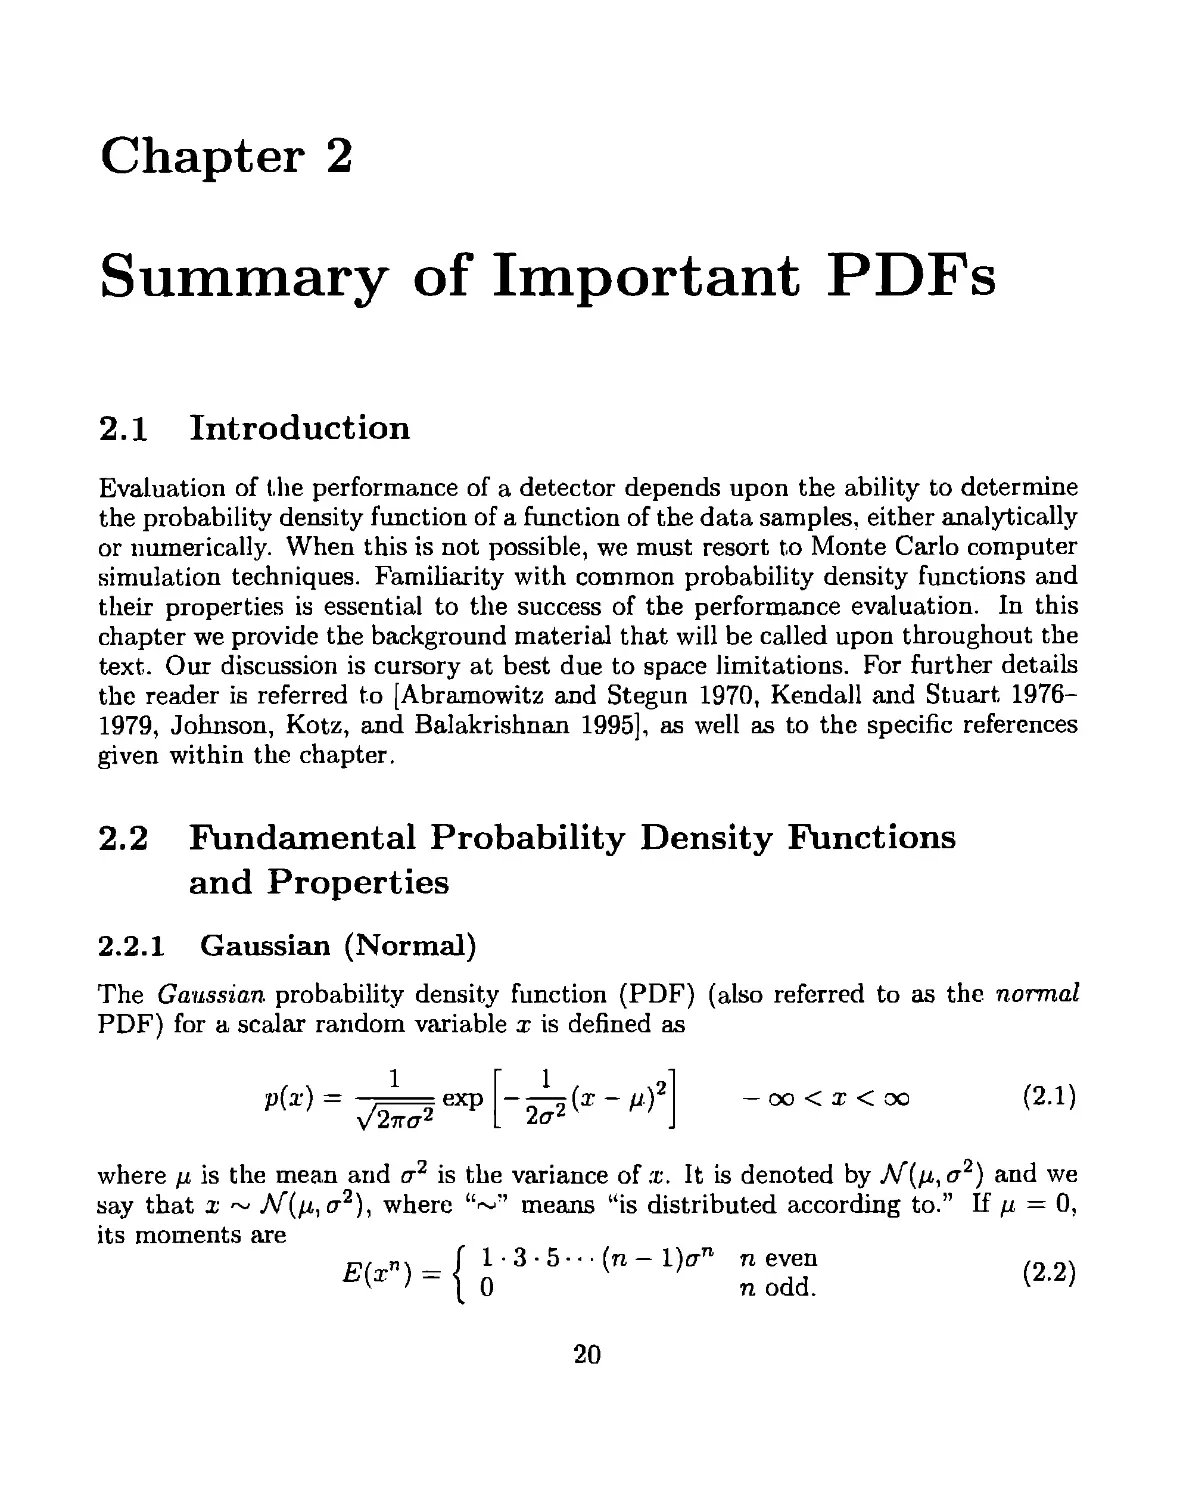 2 Summary of Important PDFs
2.2 Fundamental Probability Density Functions and Properties